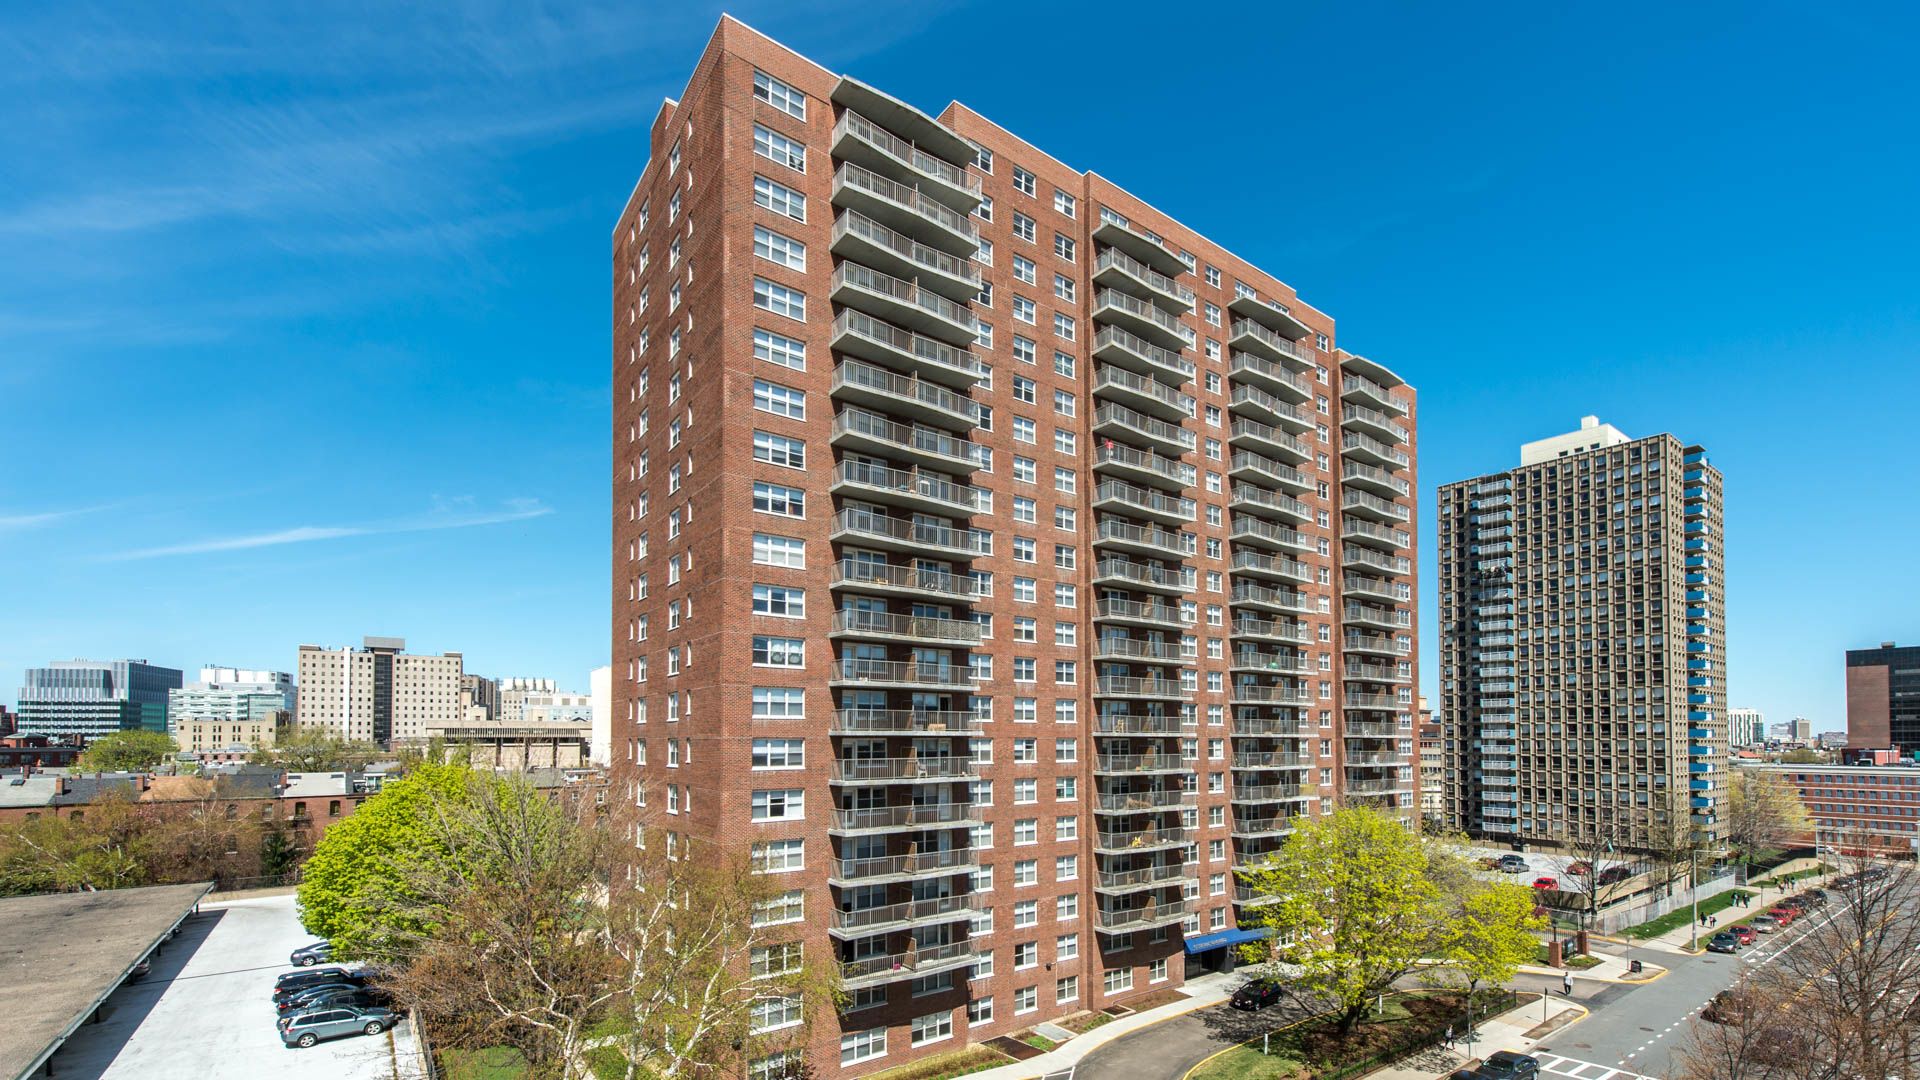 CityView at Longwood Apartments - Longwood Medical Center - 75 St ...